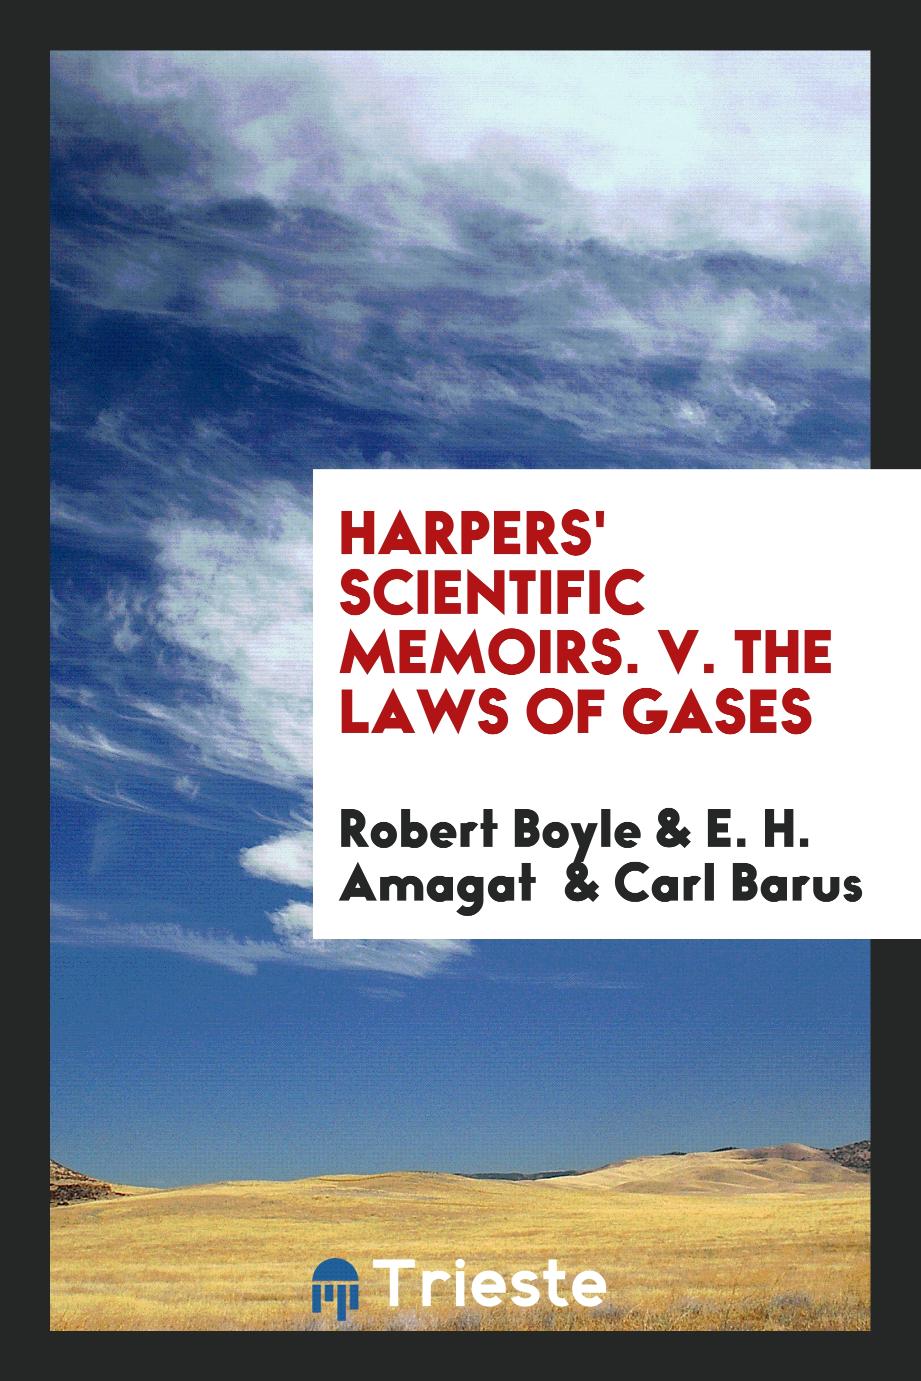 Harpers' Scientific Memoirs. V. The Laws of Gases